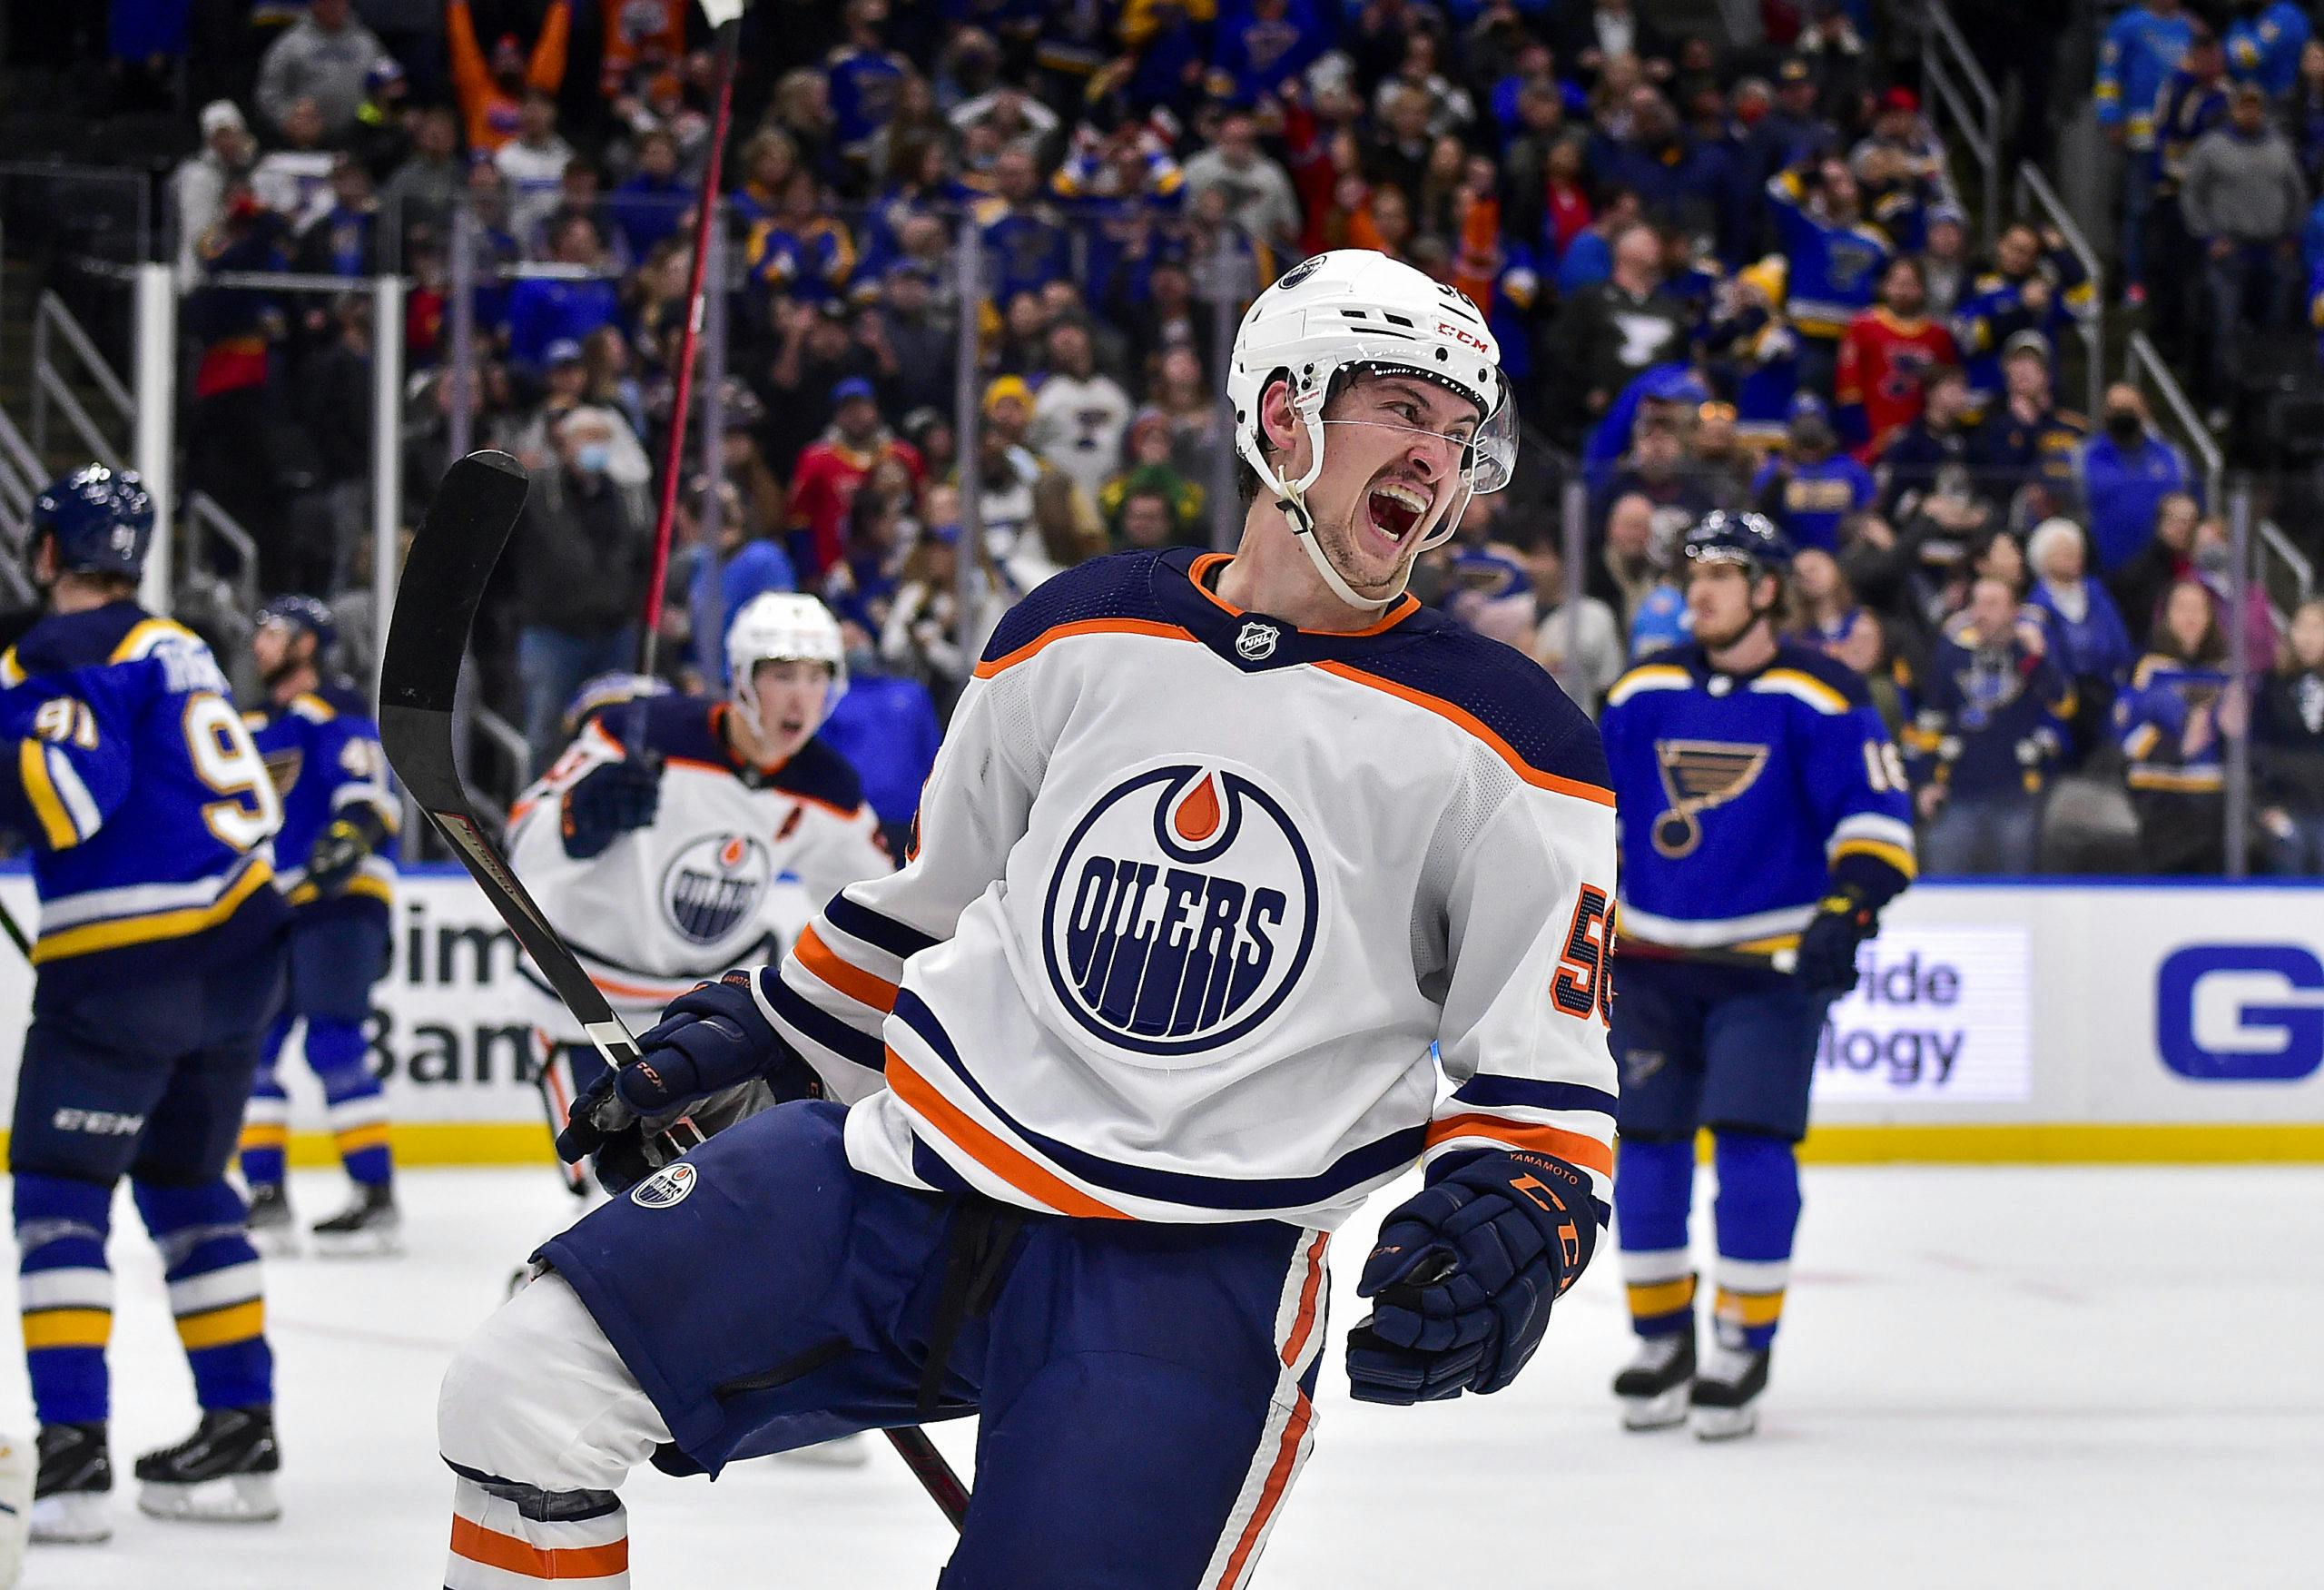 Kailer Yamamoto And The 2018-19 Oilers - The Copper & Blue